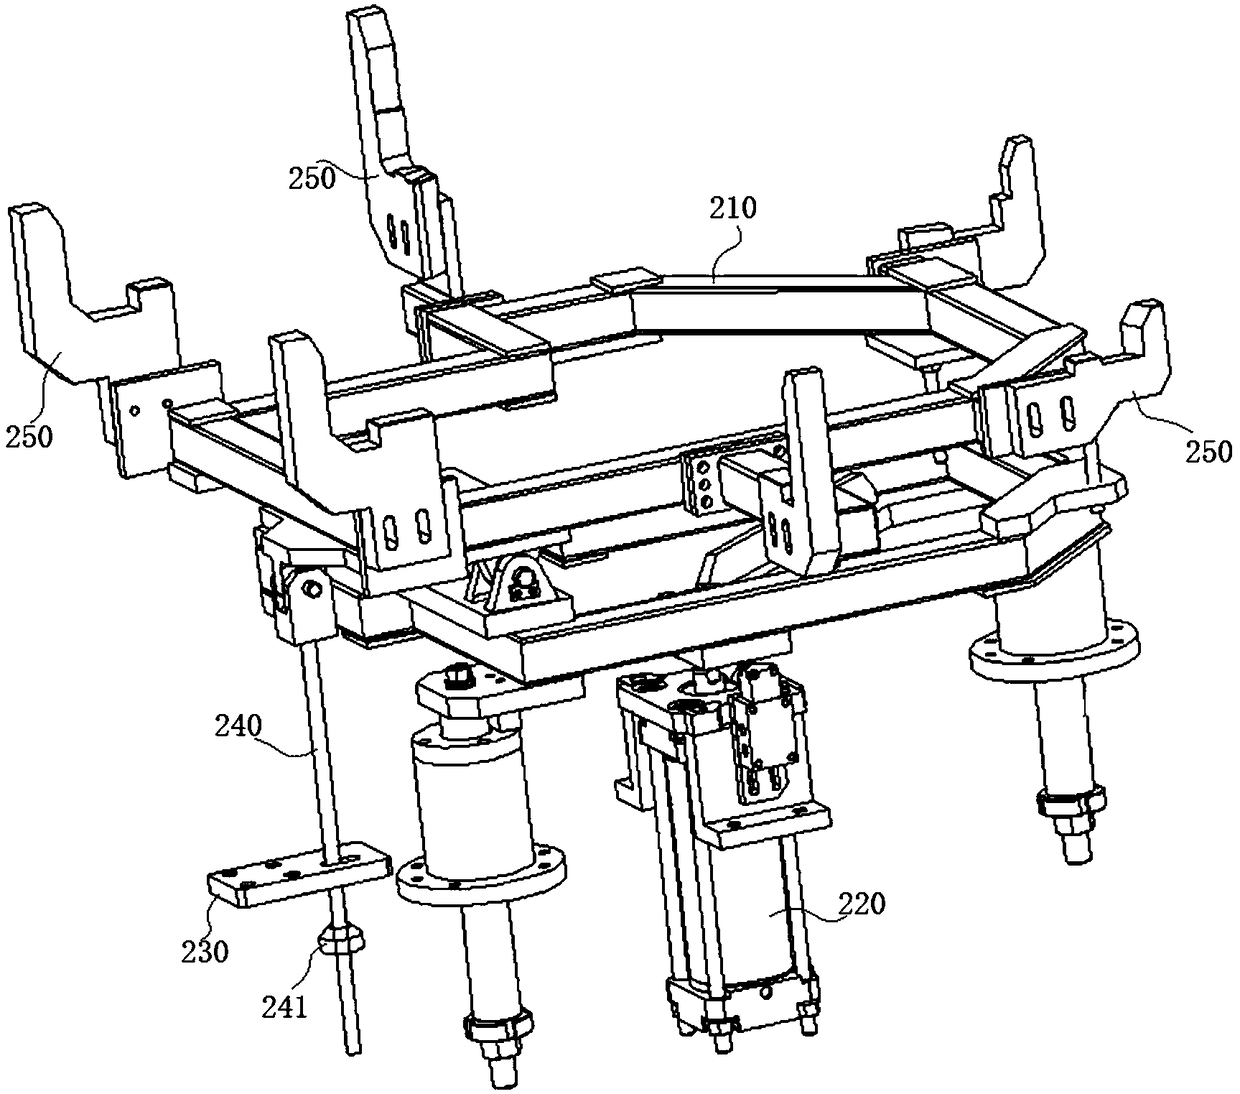 Welding positioning device for automobile sheet metal parts